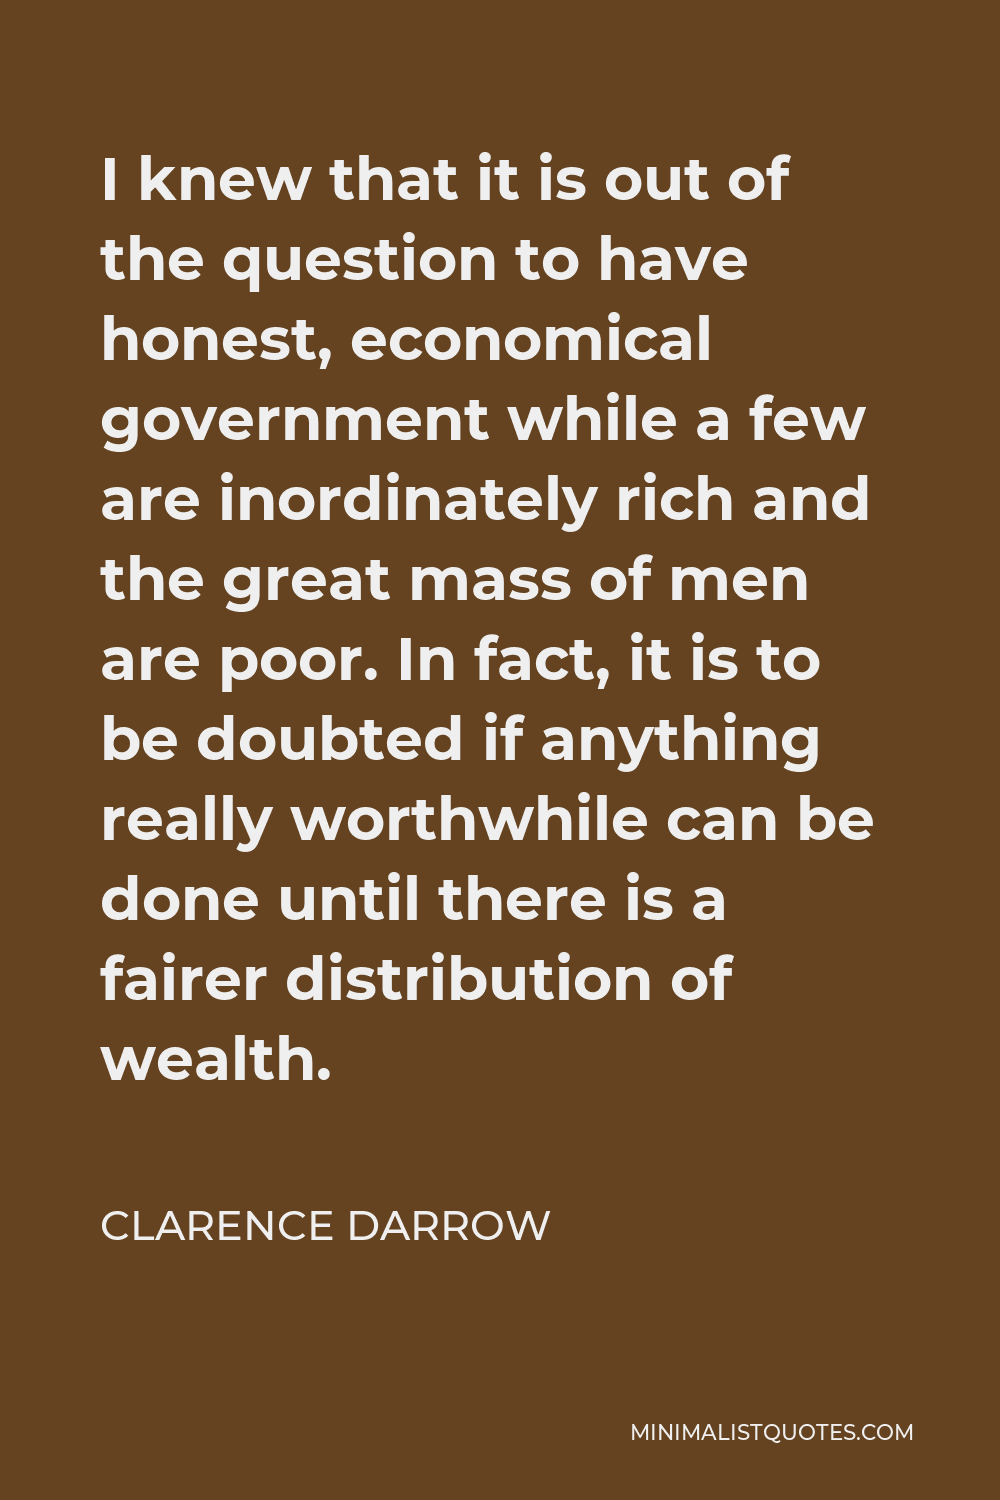 Clarence Darrow Quote - I knew that it is out of the question to have honest, economical government while a few are inordinately rich and the great mass of men are poor. In fact, it is to be doubted if anything really worthwhile can be done until there is a fairer distribution of wealth.